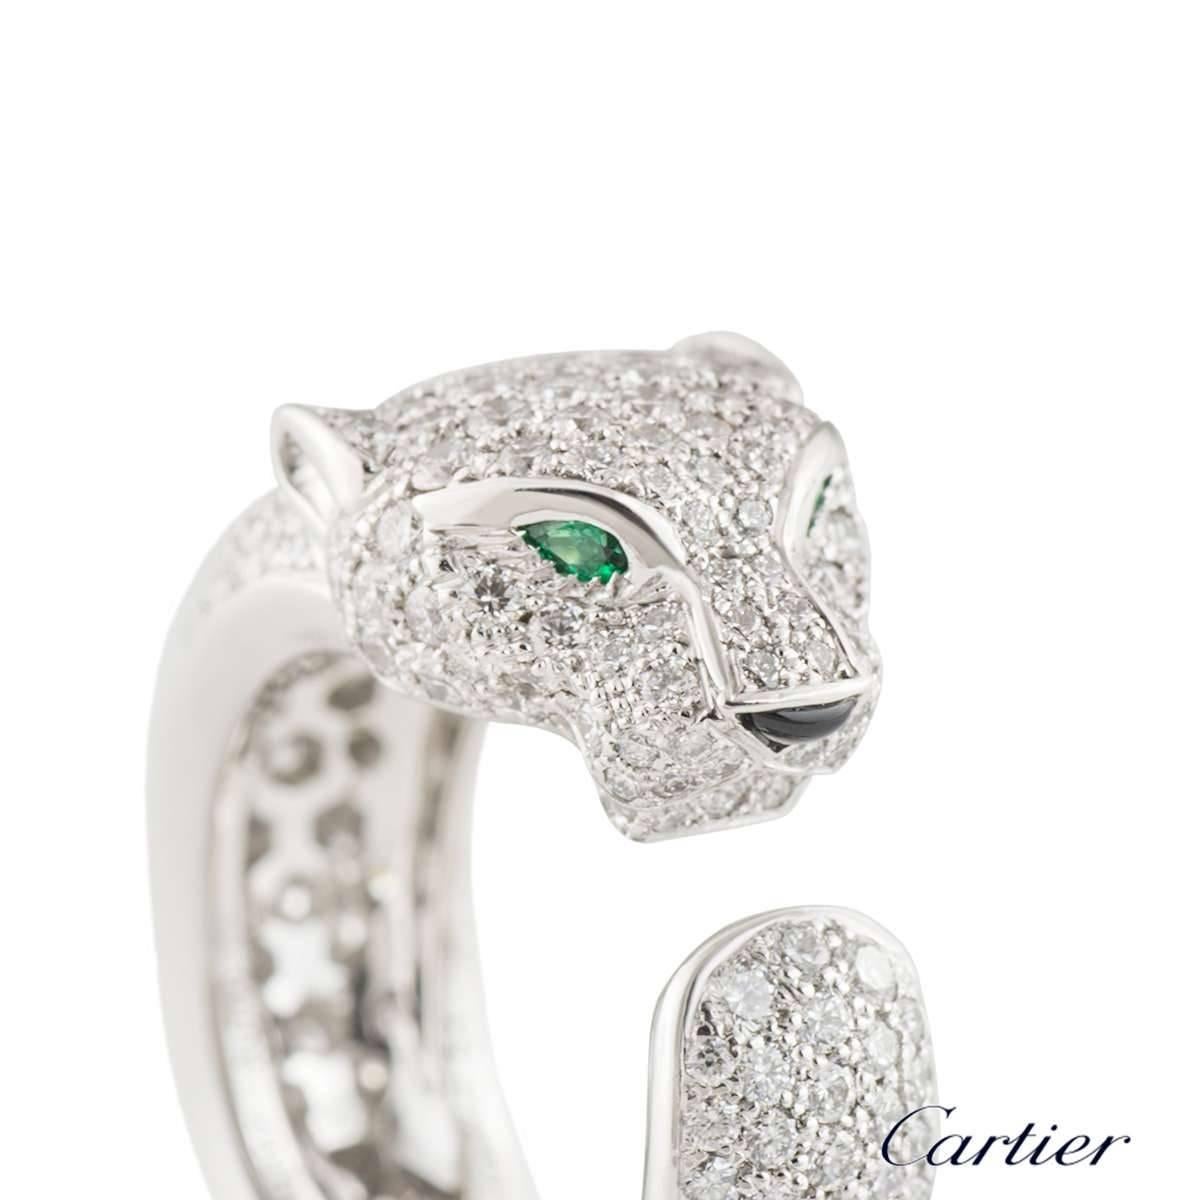 Cartier Panthere Diamond Emerald and Onyx Ring 1